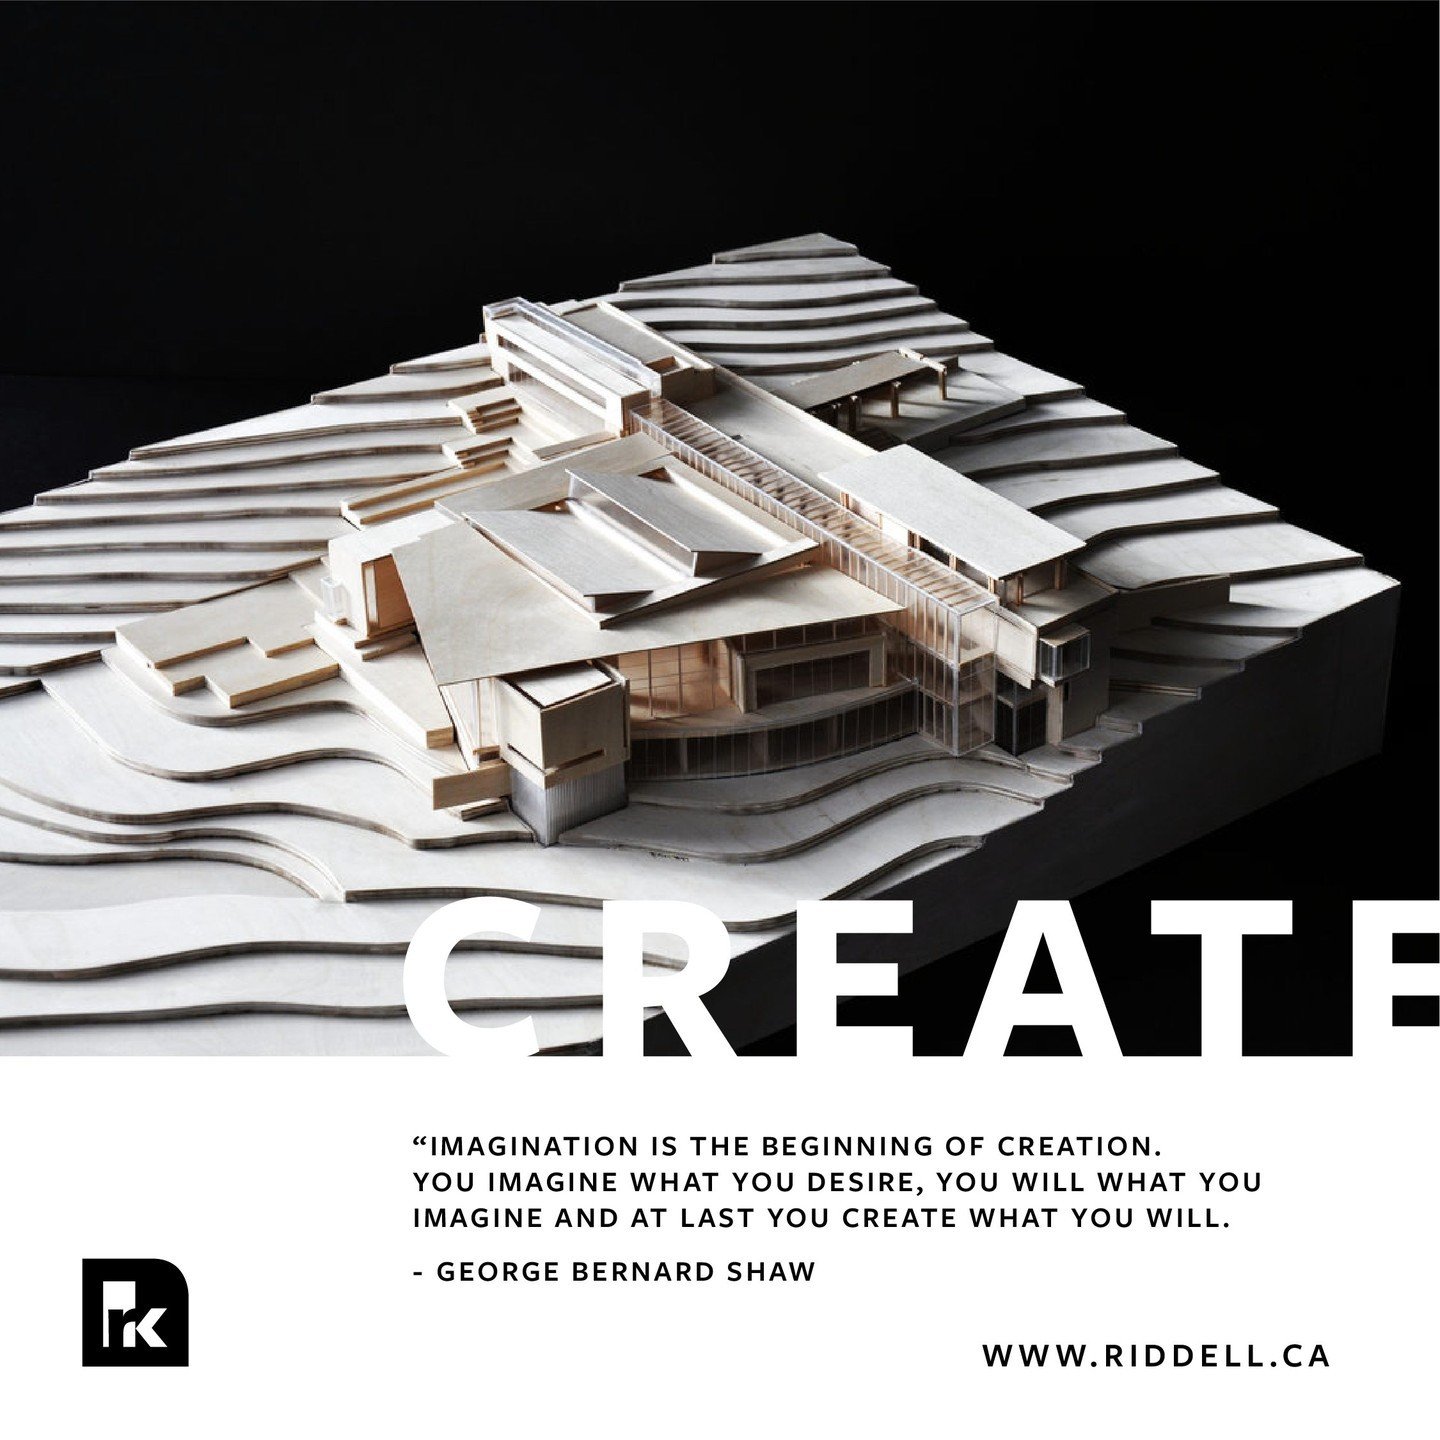 &ldquo;Imagination is the beginning of creation. You imagine what you desire, you will what you  imagine and at last you create what you will.&quot; - George Bernard Shaw 

Image 📷
Project: Global Centre for Human Values
Architect of Record: Riddell